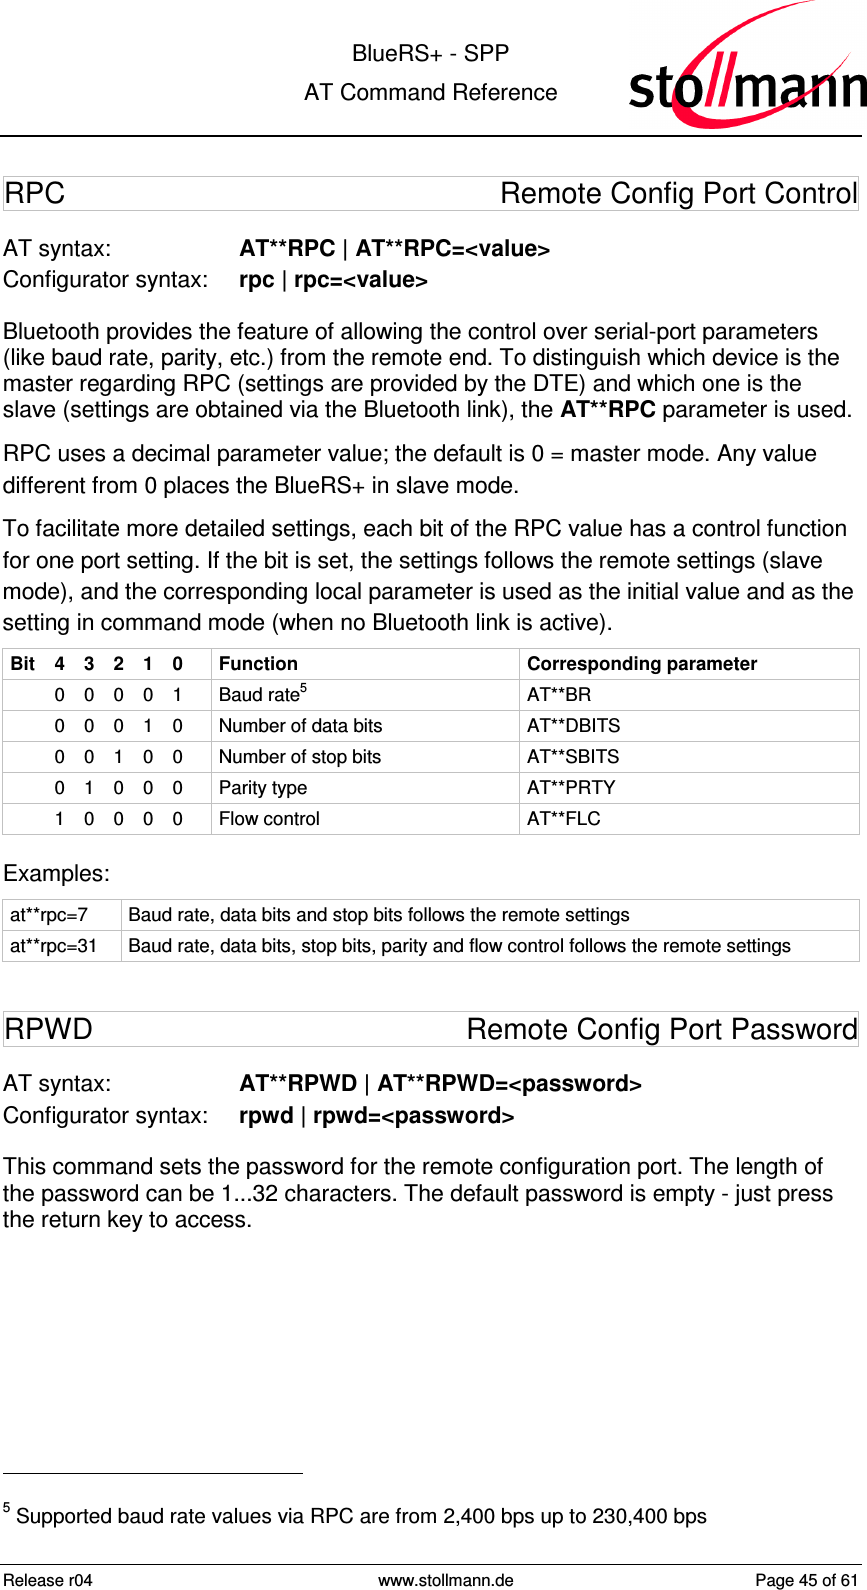  BlueRS+ - SPP AT Command Reference Release r04  www.stollmann.de  Page 45 of 61  RPC  Remote Config Port Control AT syntax:  AT**RPC | AT**RPC=&lt;value&gt; Configurator syntax:  rpc | rpc=&lt;value&gt; Bluetooth provides the feature of allowing the control over serial-port parameters (like baud rate, parity, etc.) from the remote end. To distinguish which device is the master regarding RPC (settings are provided by the DTE) and which one is the slave (settings are obtained via the Bluetooth link), the AT**RPC parameter is used. RPC uses a decimal parameter value; the default is 0 = master mode. Any value different from 0 places the BlueRS+ in slave mode. To facilitate more detailed settings, each bit of the RPC value has a control function for one port setting. If the bit is set, the settings follows the remote settings (slave mode), and the corresponding local parameter is used as the initial value and as the setting in command mode (when no Bluetooth link is active). Bit  4  3  2  1  0  Function  Corresponding parameter   0  0  0  0  1  Baud rate5  AT**BR   0  0  0  1  0  Number of data bits  AT**DBITS   0  0  1  0  0  Number of stop bits  AT**SBITS   0  1  0  0  0  Parity type  AT**PRTY   1  0  0  0  0  Flow control  AT**FLC Examples: at**rpc=7  Baud rate, data bits and stop bits follows the remote settings at**rpc=31  Baud rate, data bits, stop bits, parity and flow control follows the remote settings RPWD  Remote Config Port Password AT syntax:  AT**RPWD | AT**RPWD=&lt;password&gt; Configurator syntax:  rpwd | rpwd=&lt;password&gt; This command sets the password for the remote configuration port. The length of the password can be 1...32 characters. The default password is empty - just press the return key to access.                                                 5 Supported baud rate values via RPC are from 2,400 bps up to 230,400 bps 